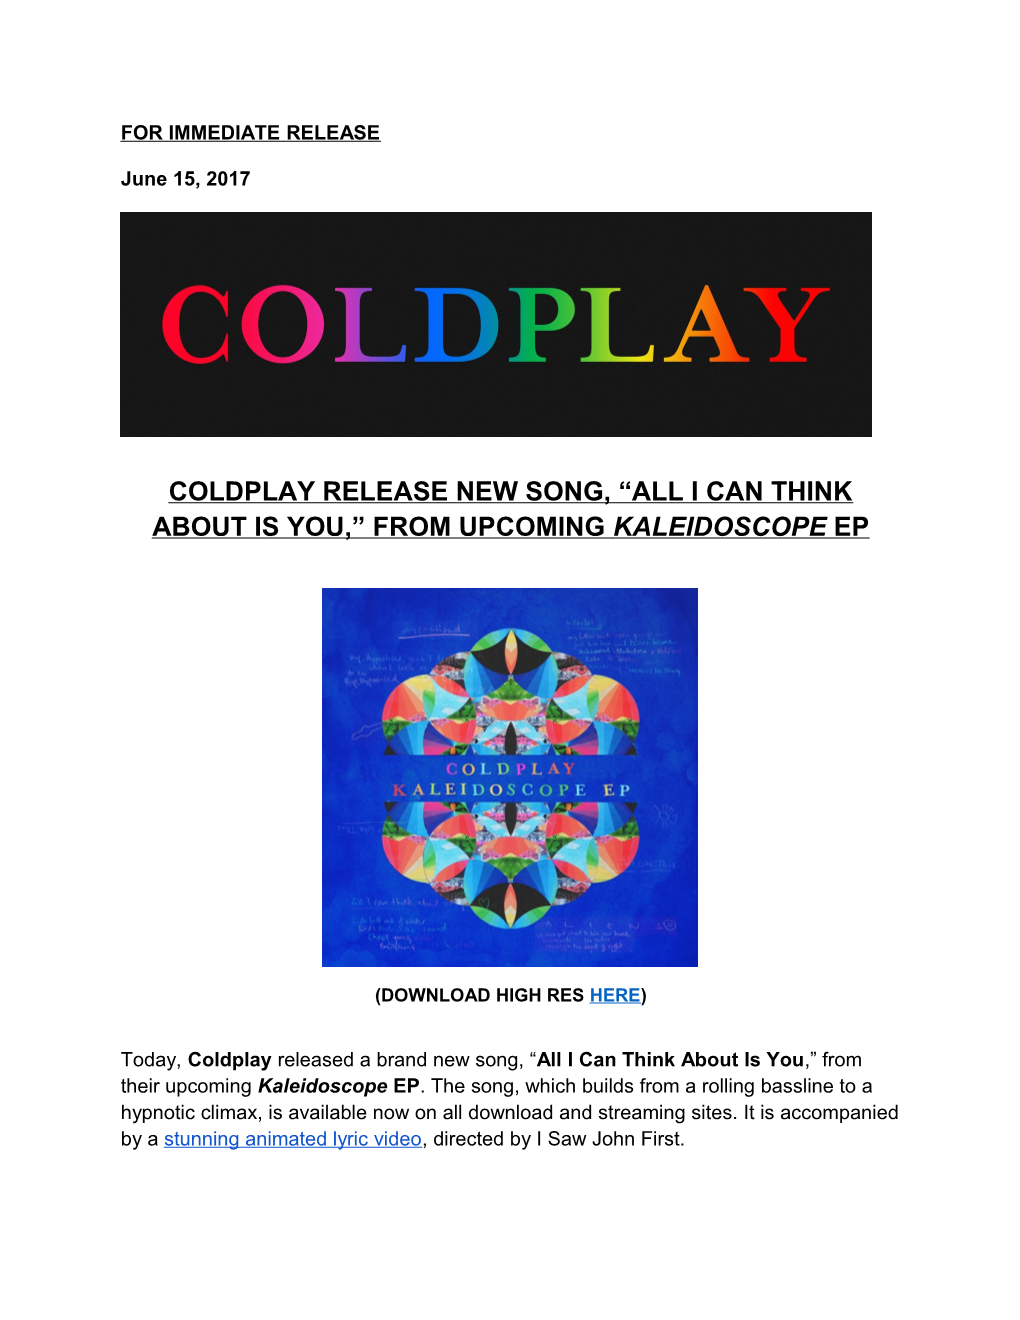 Coldplay Release New Song, All I Can Think About Is You, from Upcoming Kaleidoscope Ep